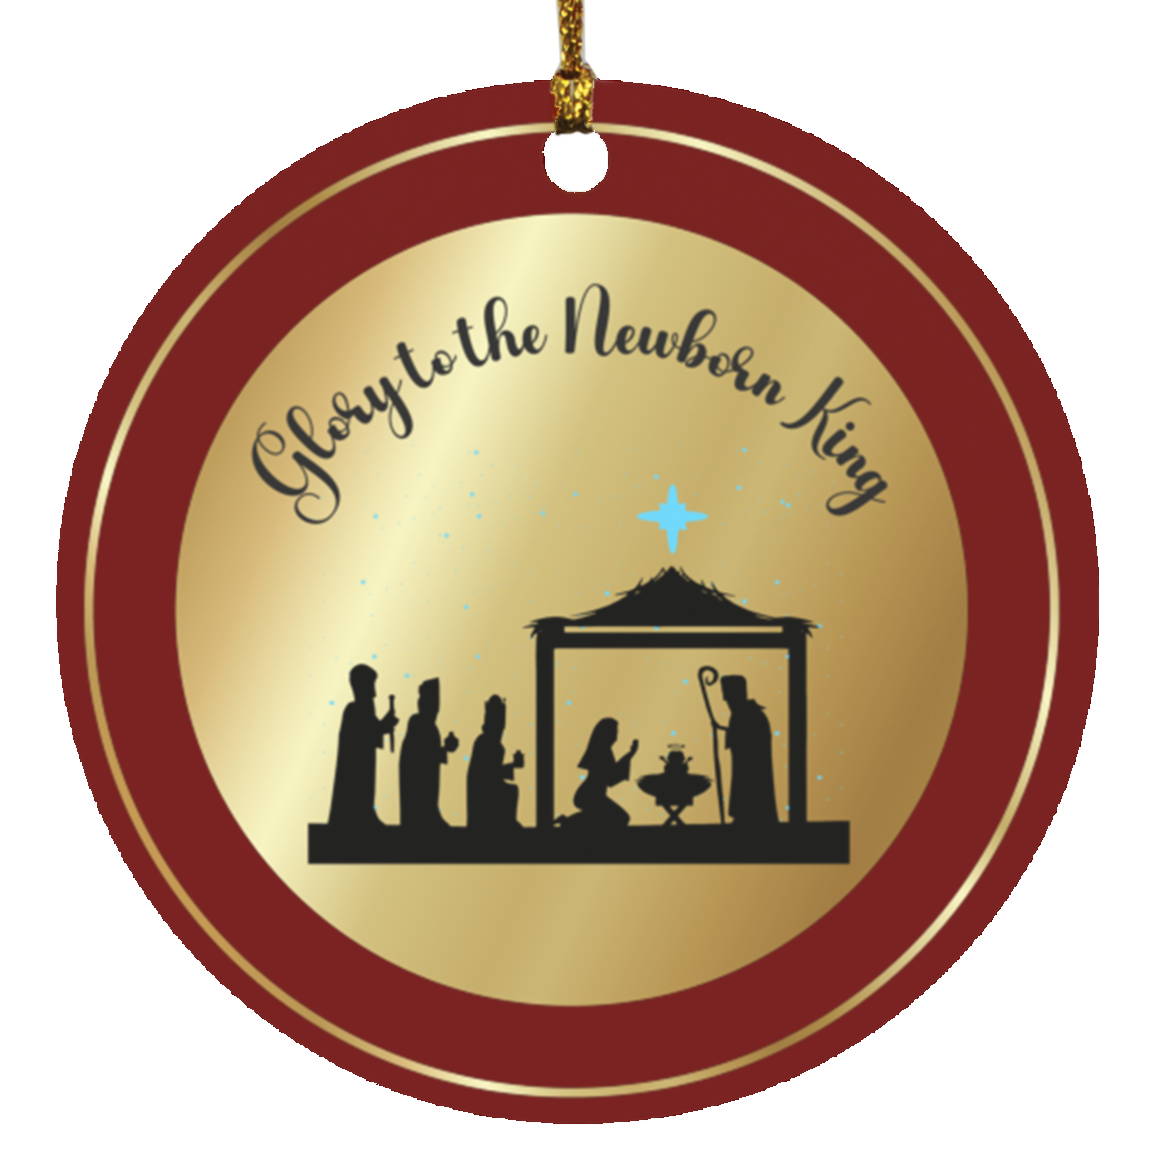 Glory to the newborn King - Wooden Circle Ornament